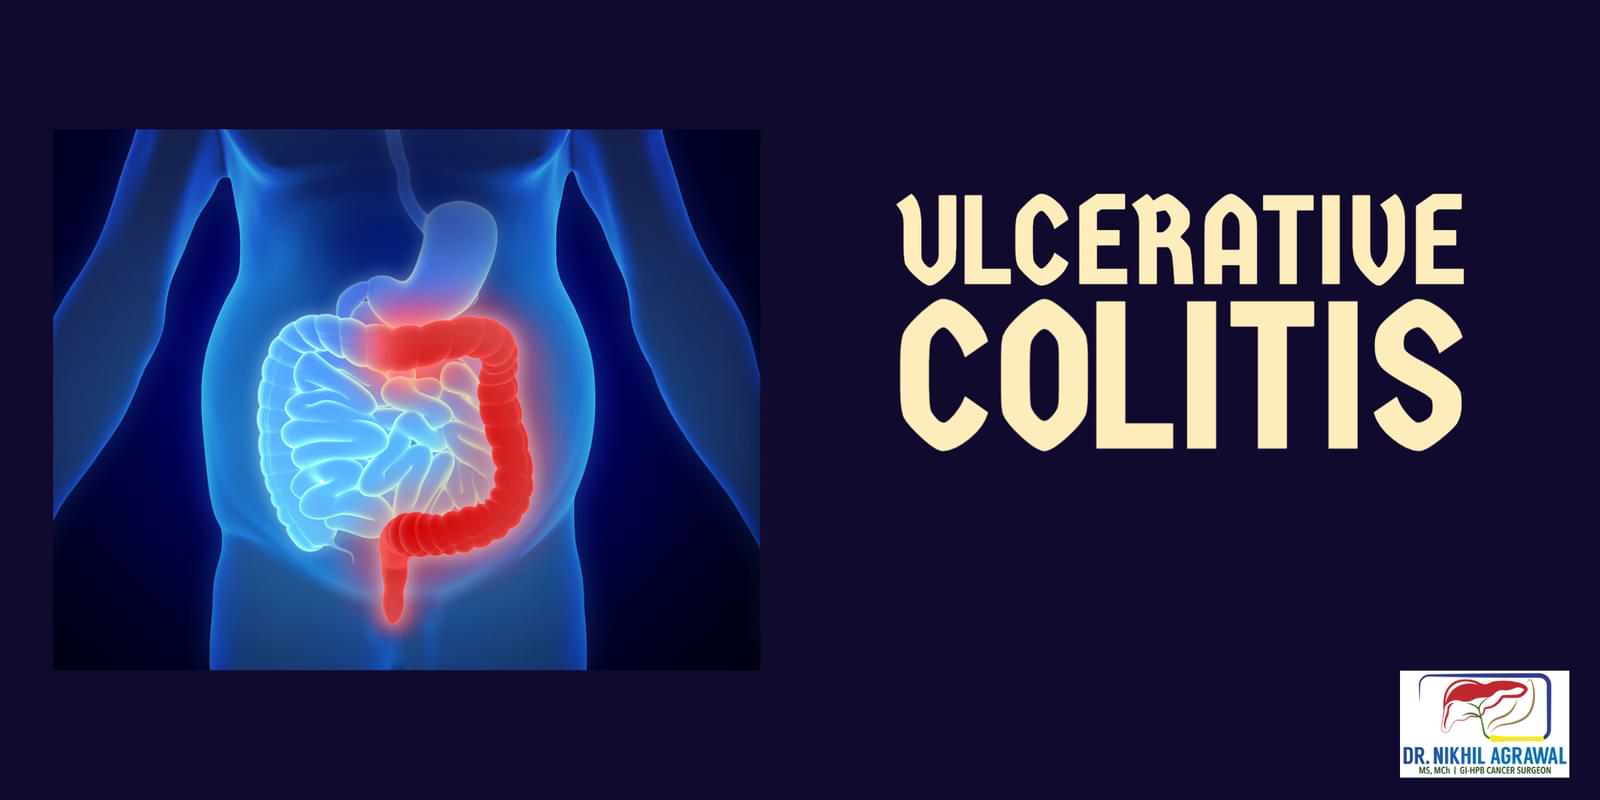 Ulcerative colitis and colorectal cancer